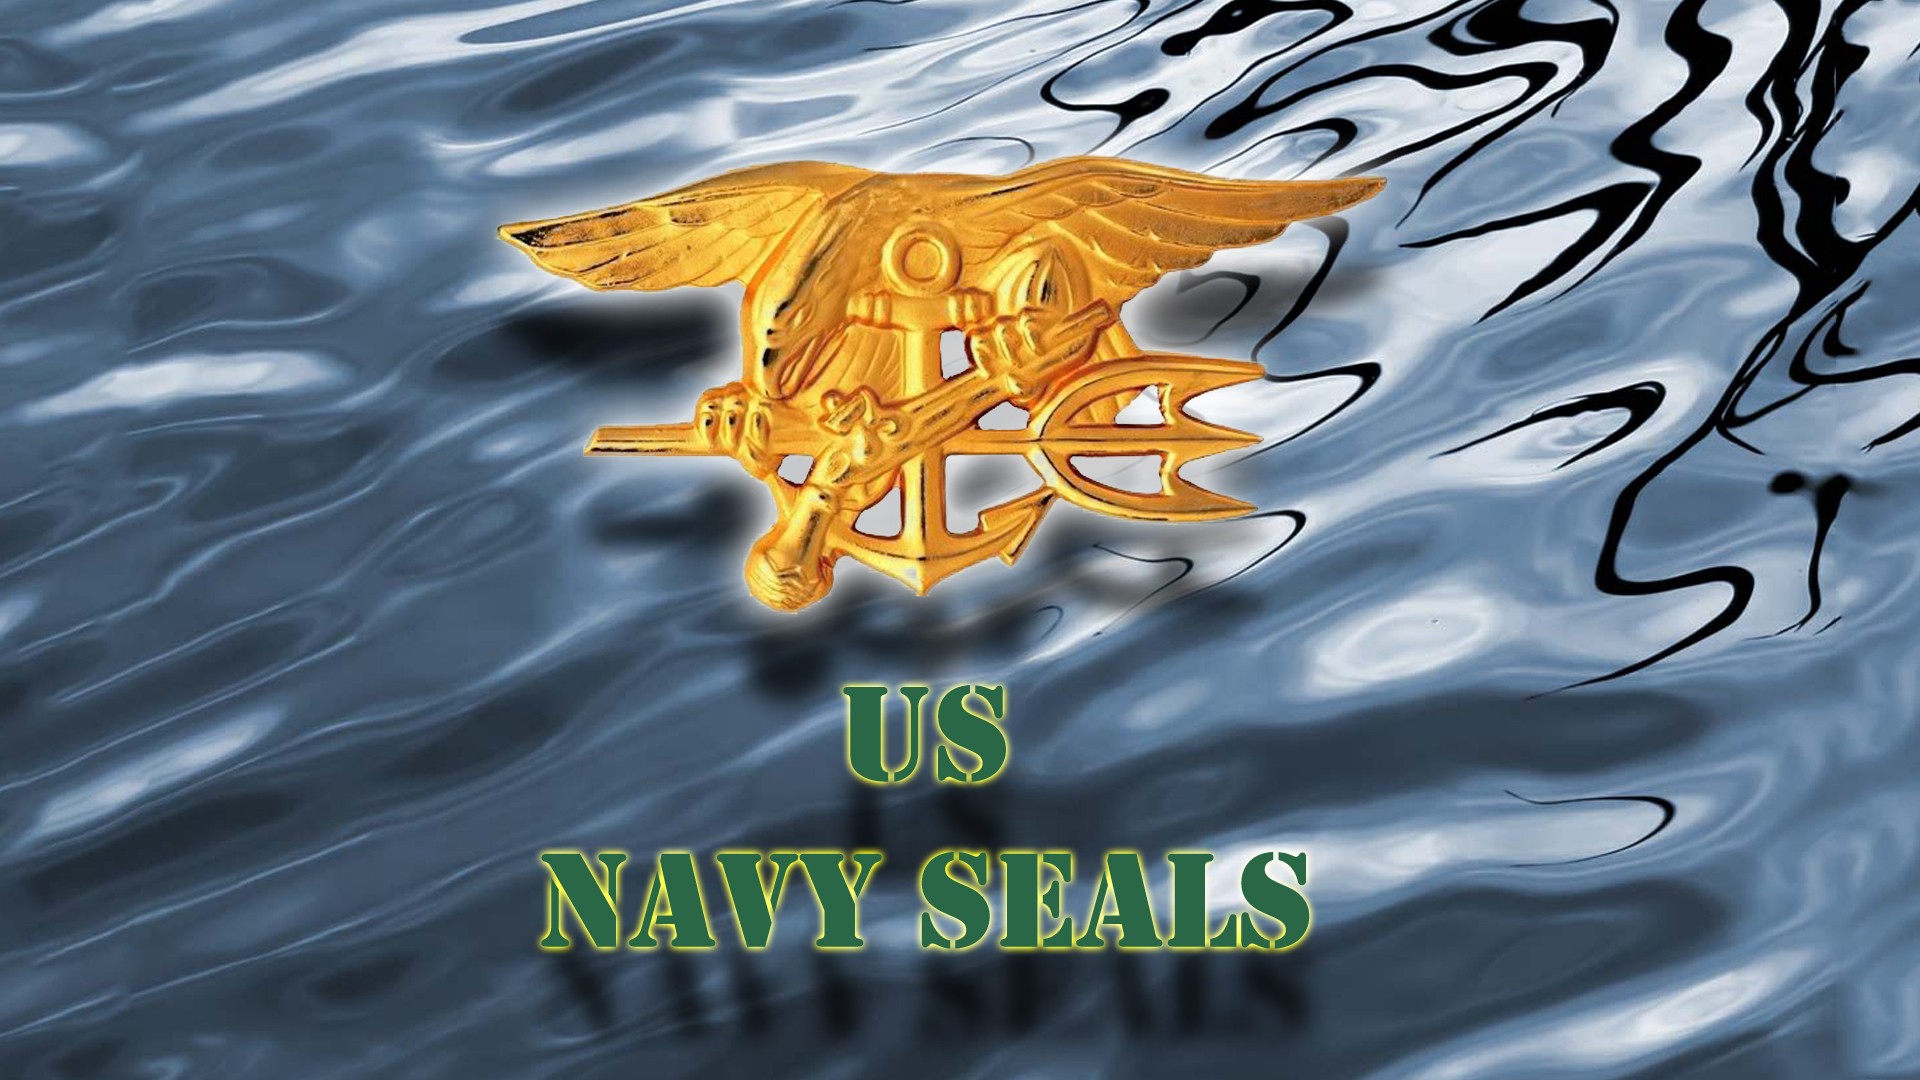 Wallpaper Military Special Forces Navy Seals Logos